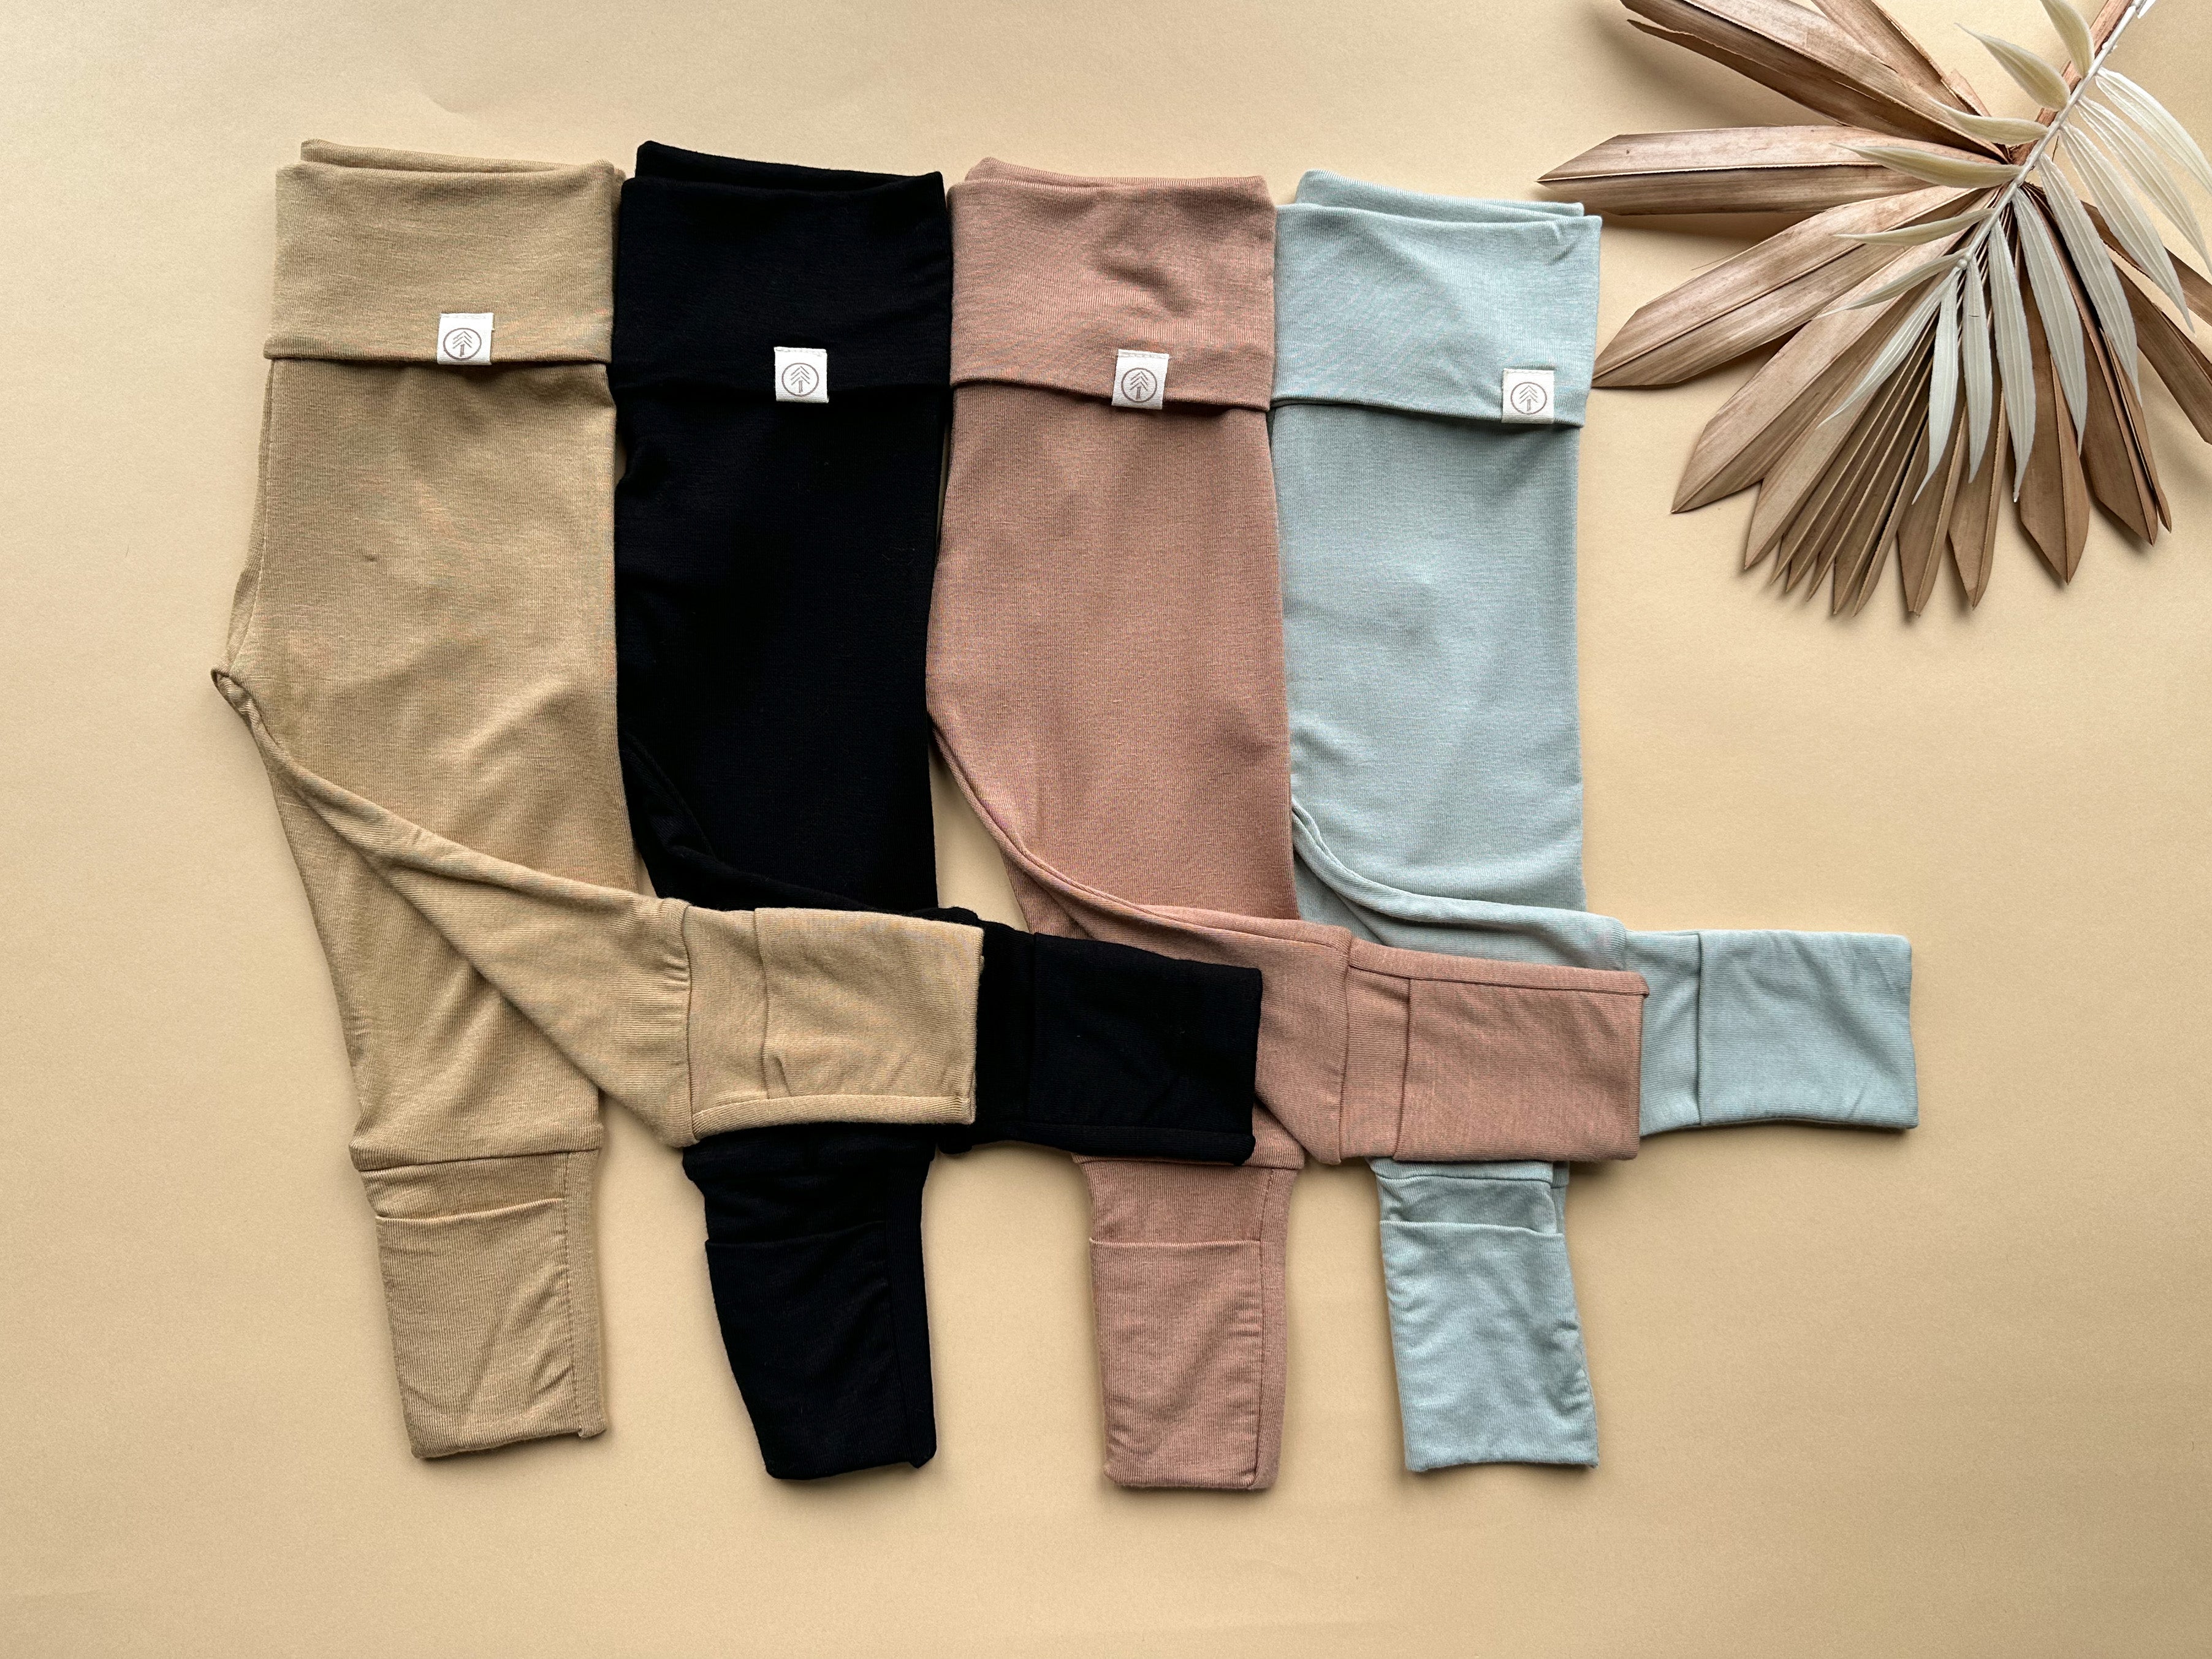 Buy EPEIUS 6 Pairs Pack Newborn Girls Tights Baby Girls Boys Seamless Cable  Knit Leggings Solid Cotton Tights Footed Pants for 0-6 Months Online at  Lowest Price Ever in India | Check